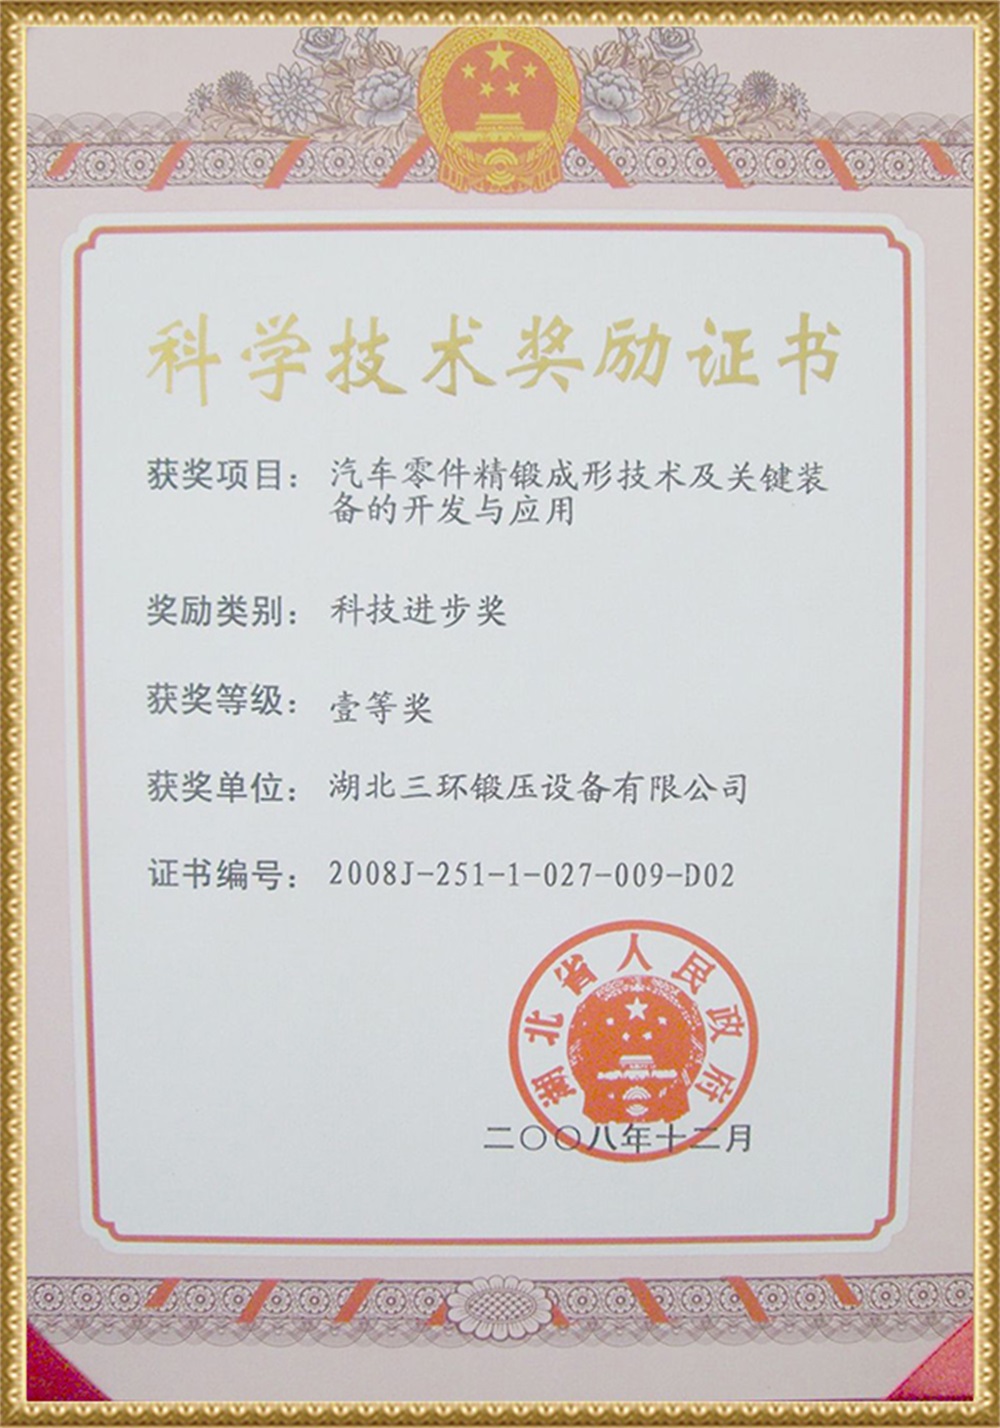 2009 Provincial Science and Technology Award (Cold Precision Forging)